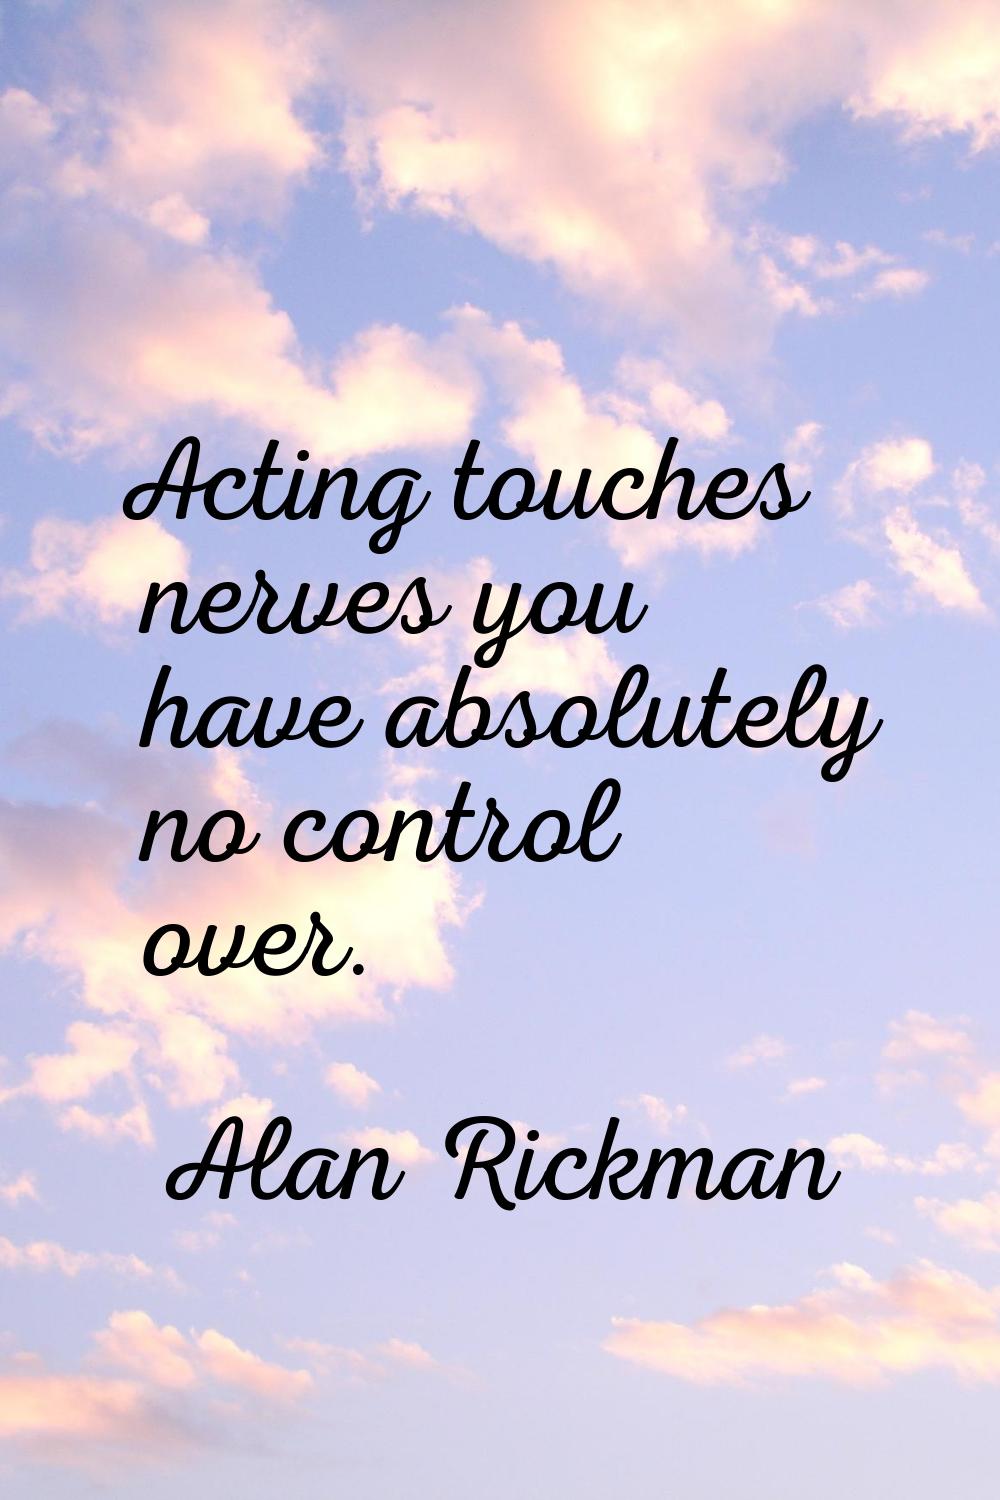 Acting touches nerves you have absolutely no control over.